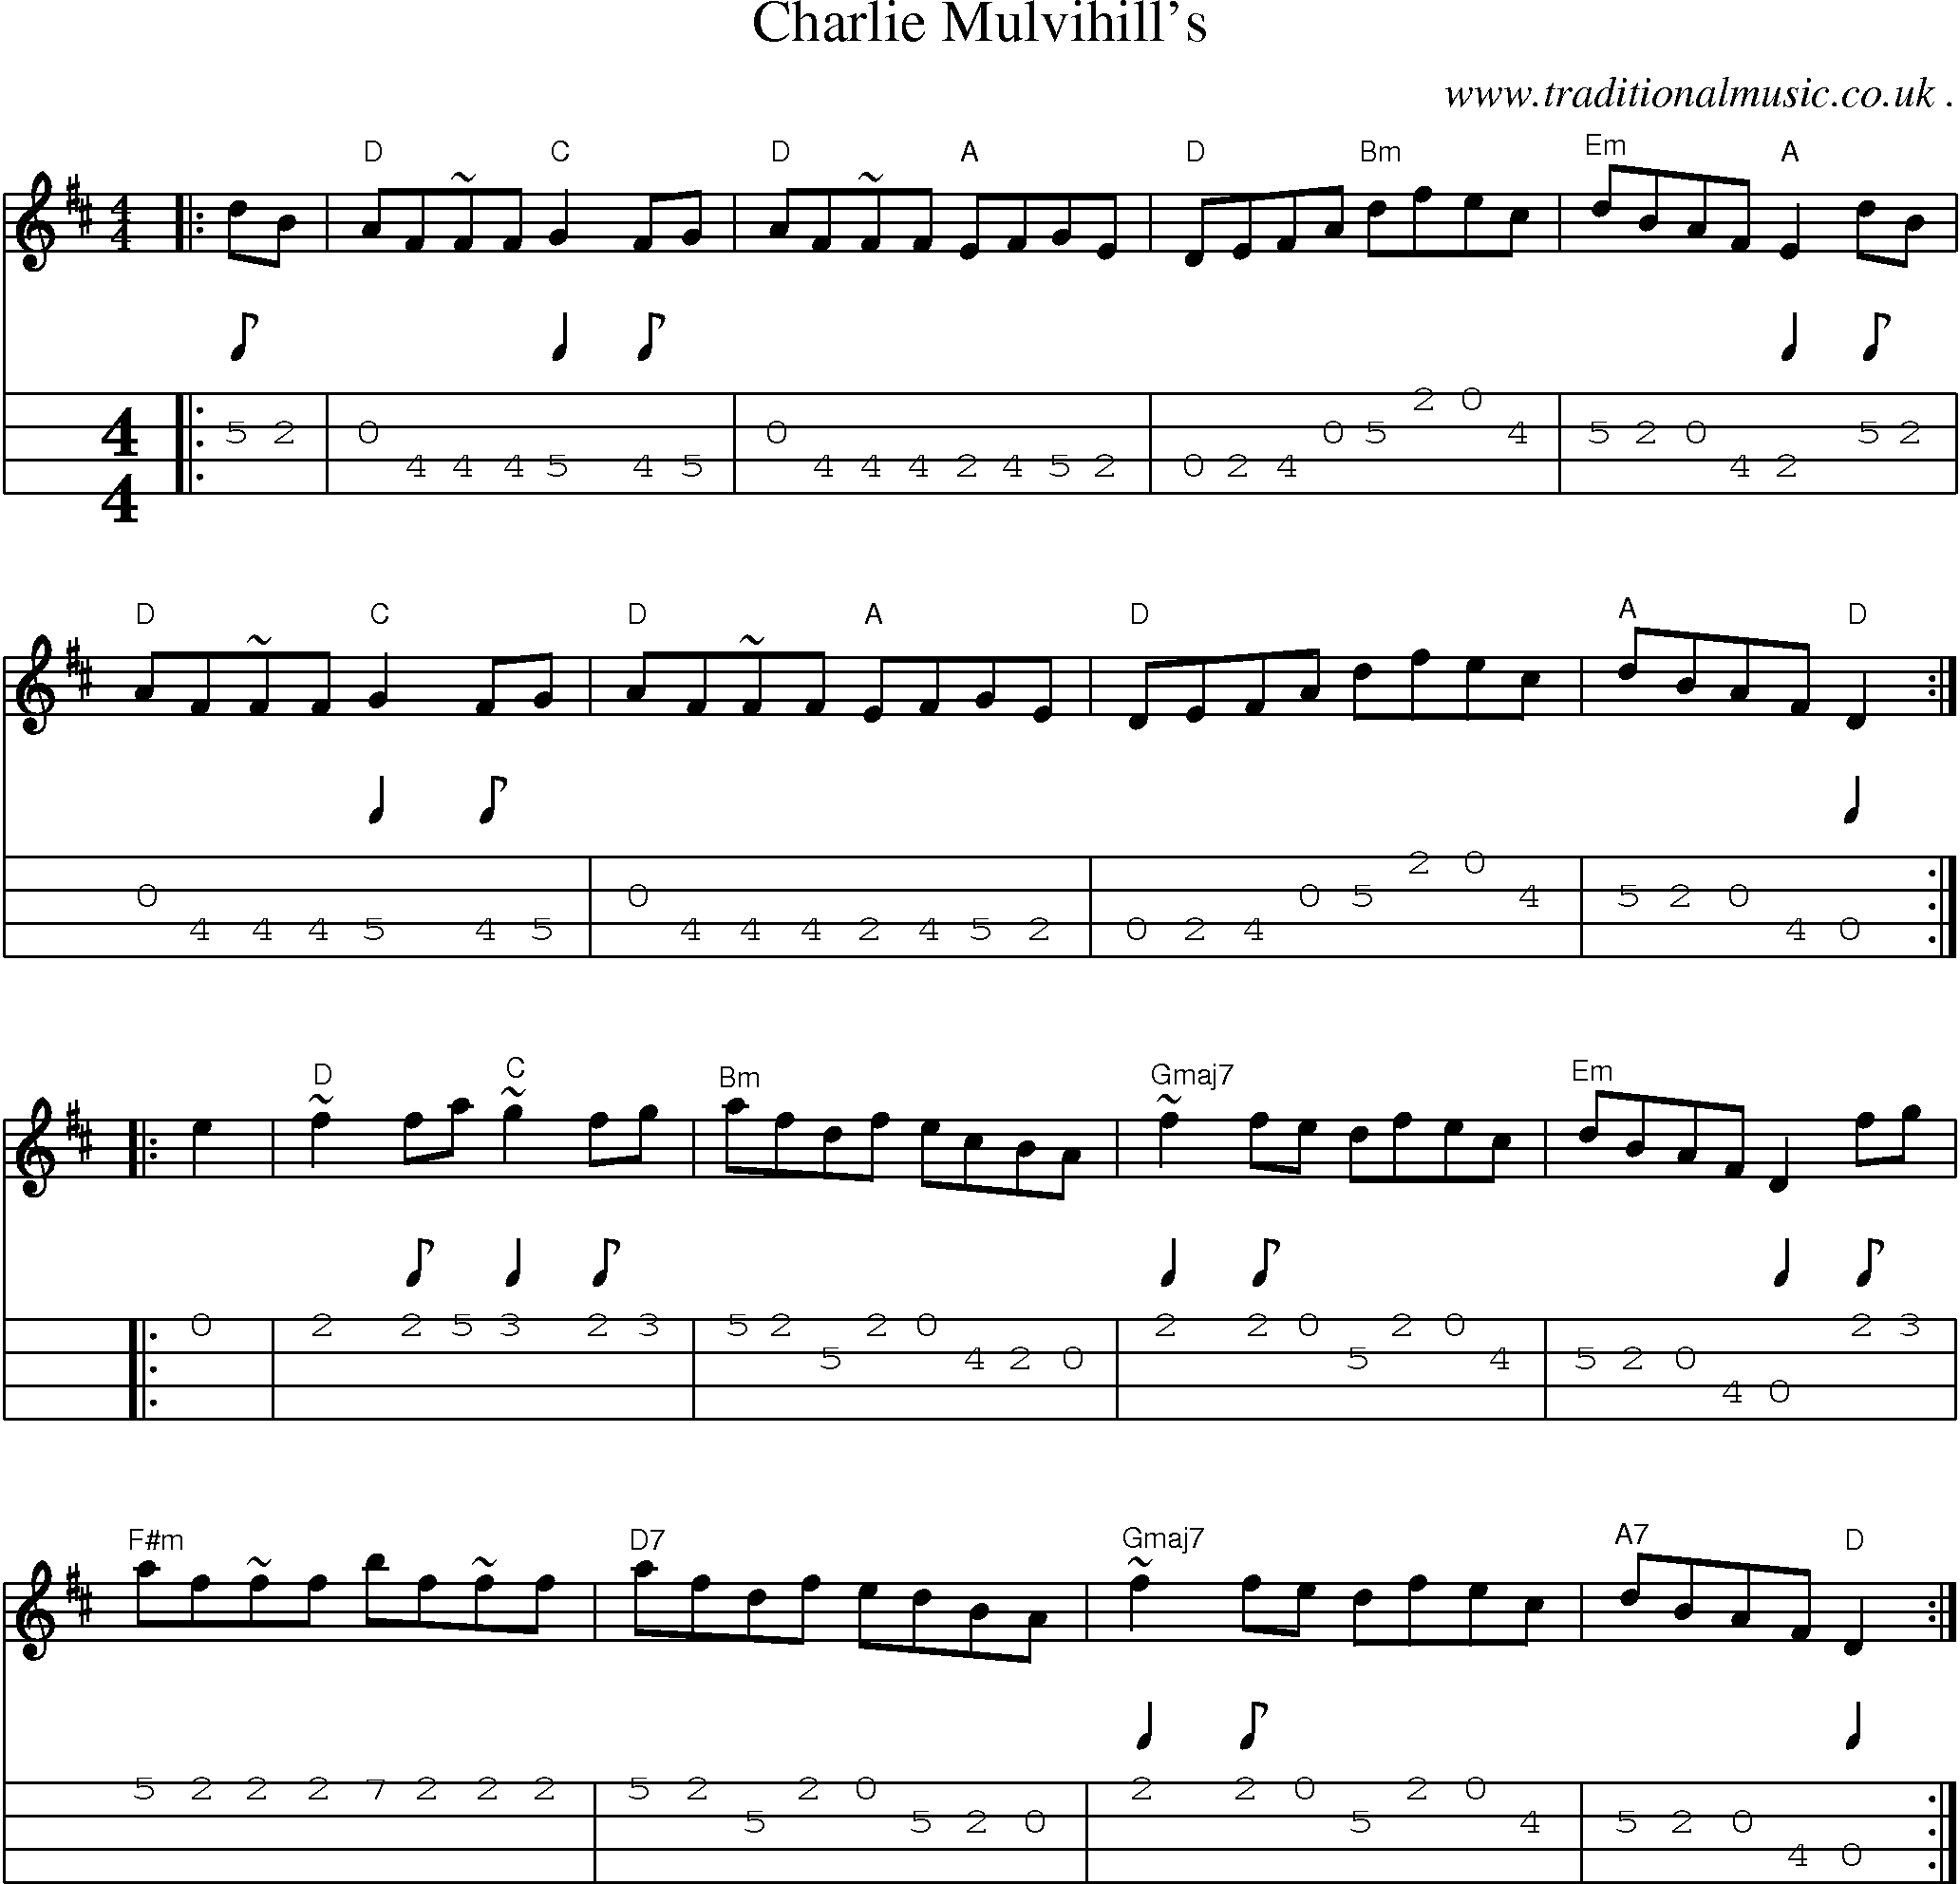 Music Score and Guitar Tabs for Charlie Mulvihills